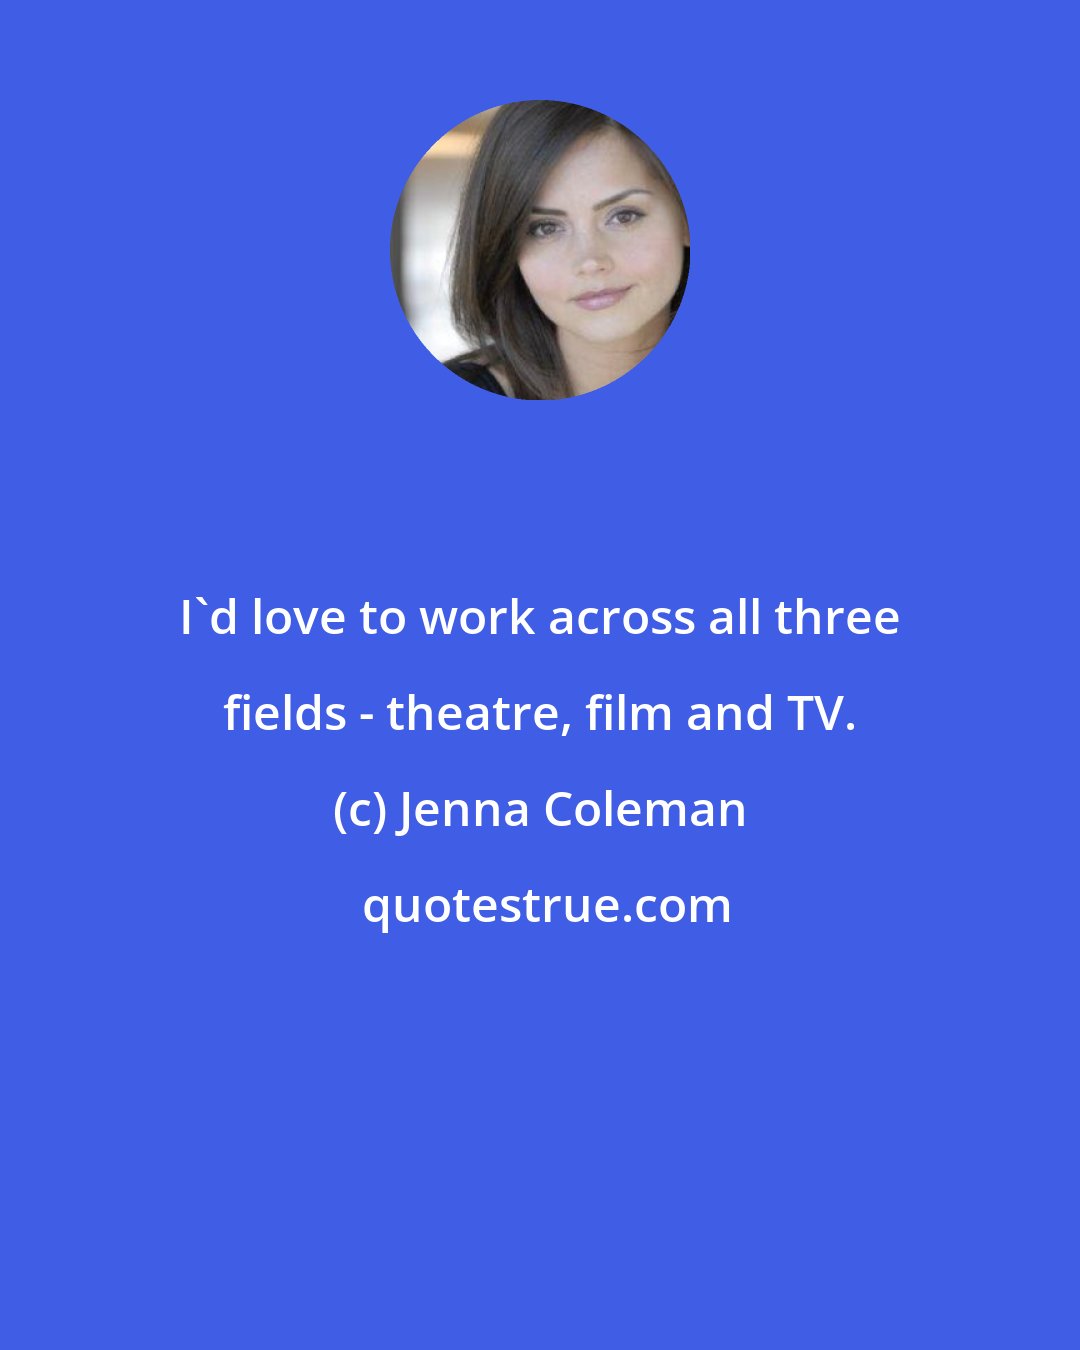 Jenna Coleman: I'd love to work across all three fields - theatre, film and TV.